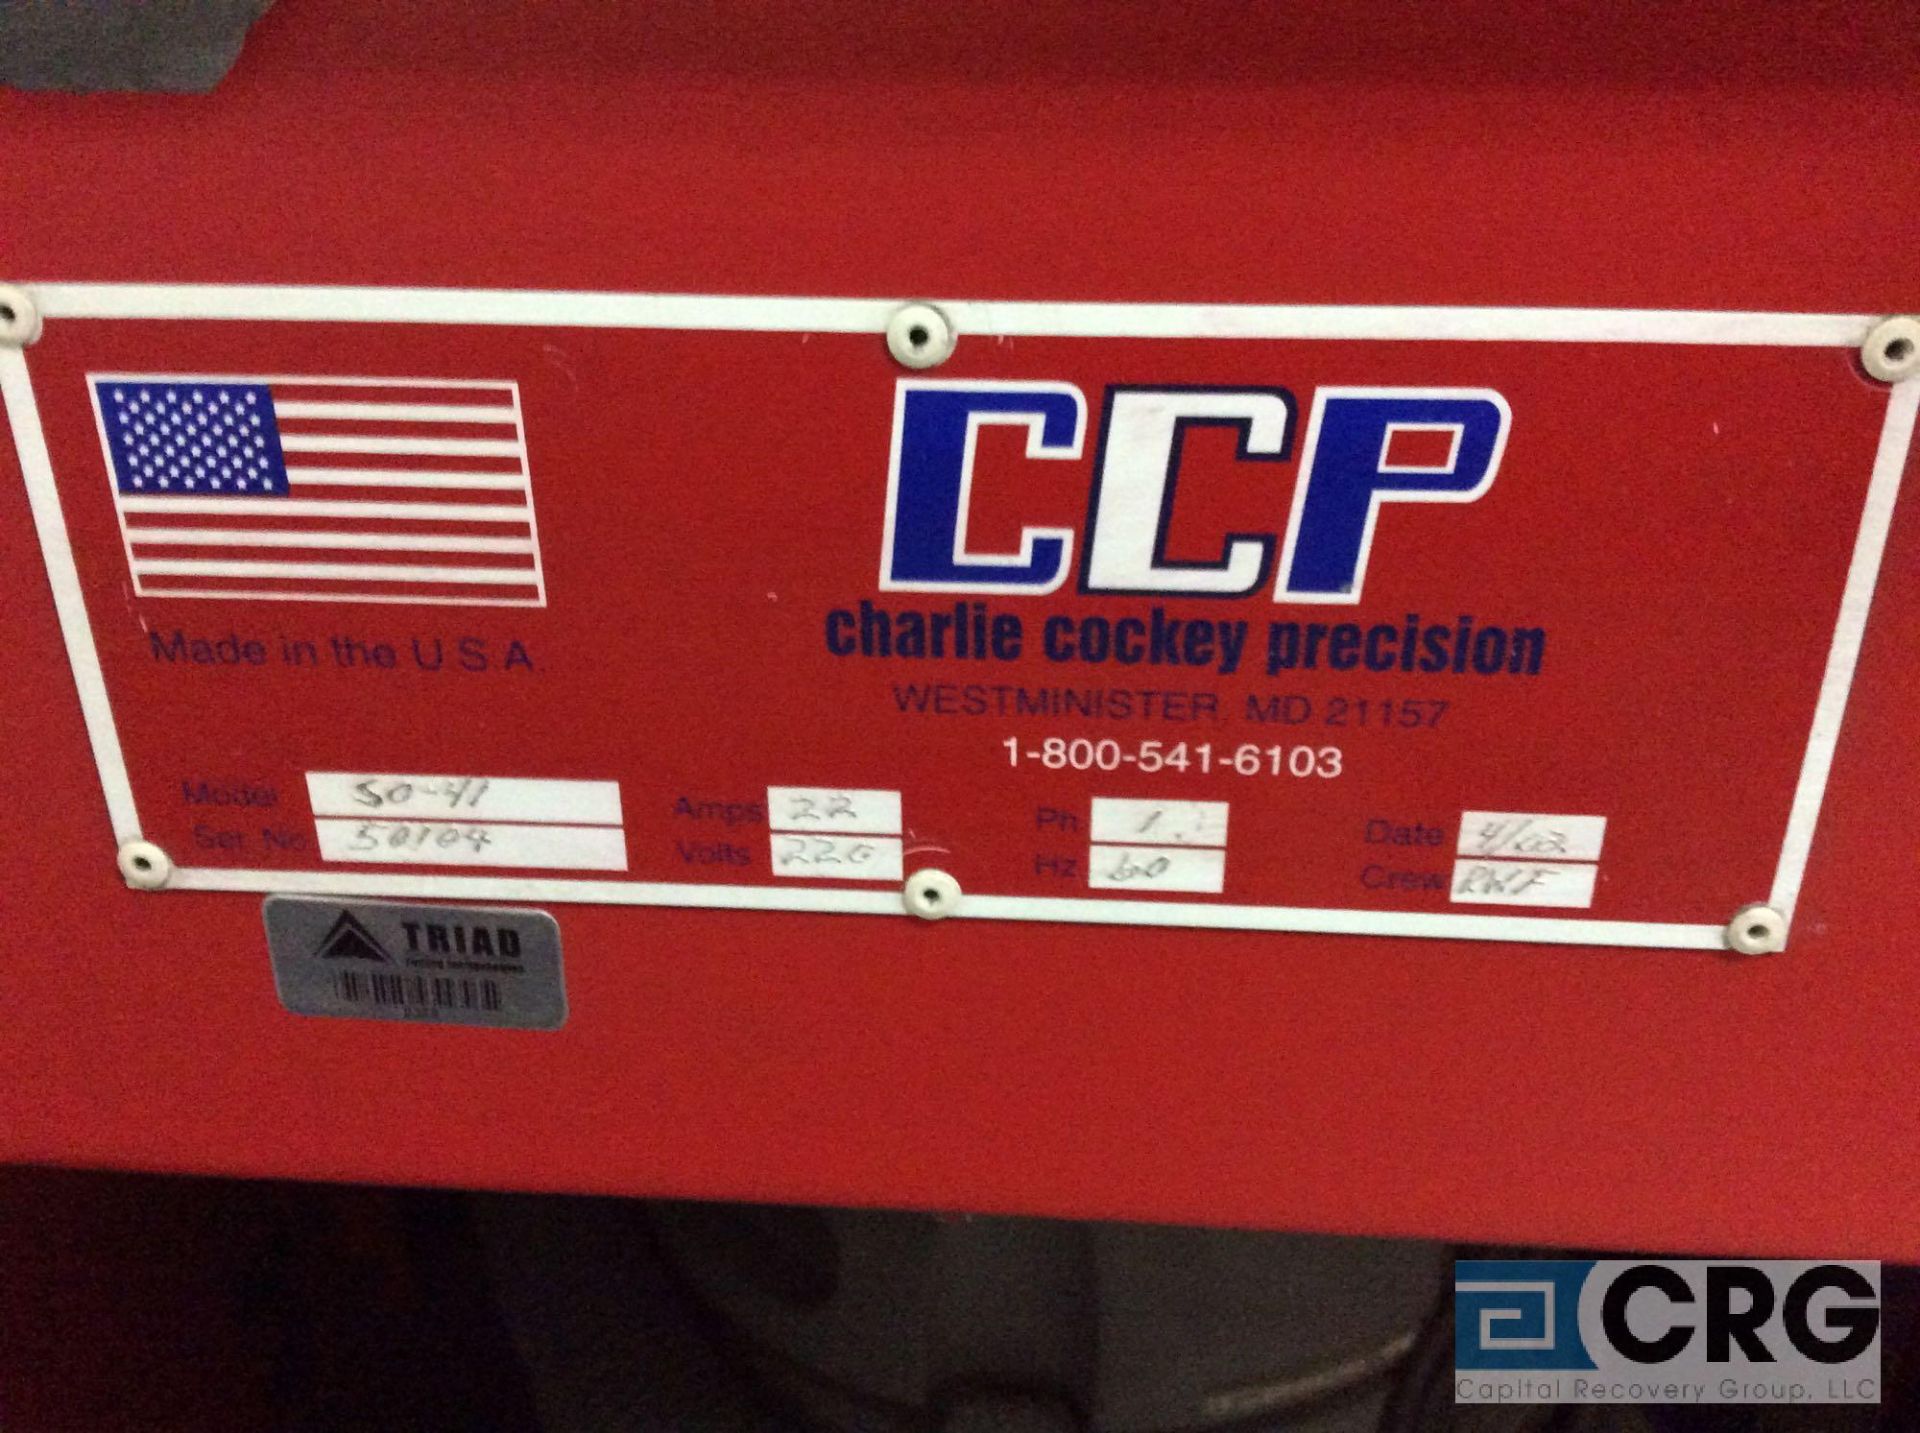 Charley Cockey Precision head straightening oven, 34" wide x 18" high x 28" deep furnace, 550 degree - Image 2 of 3